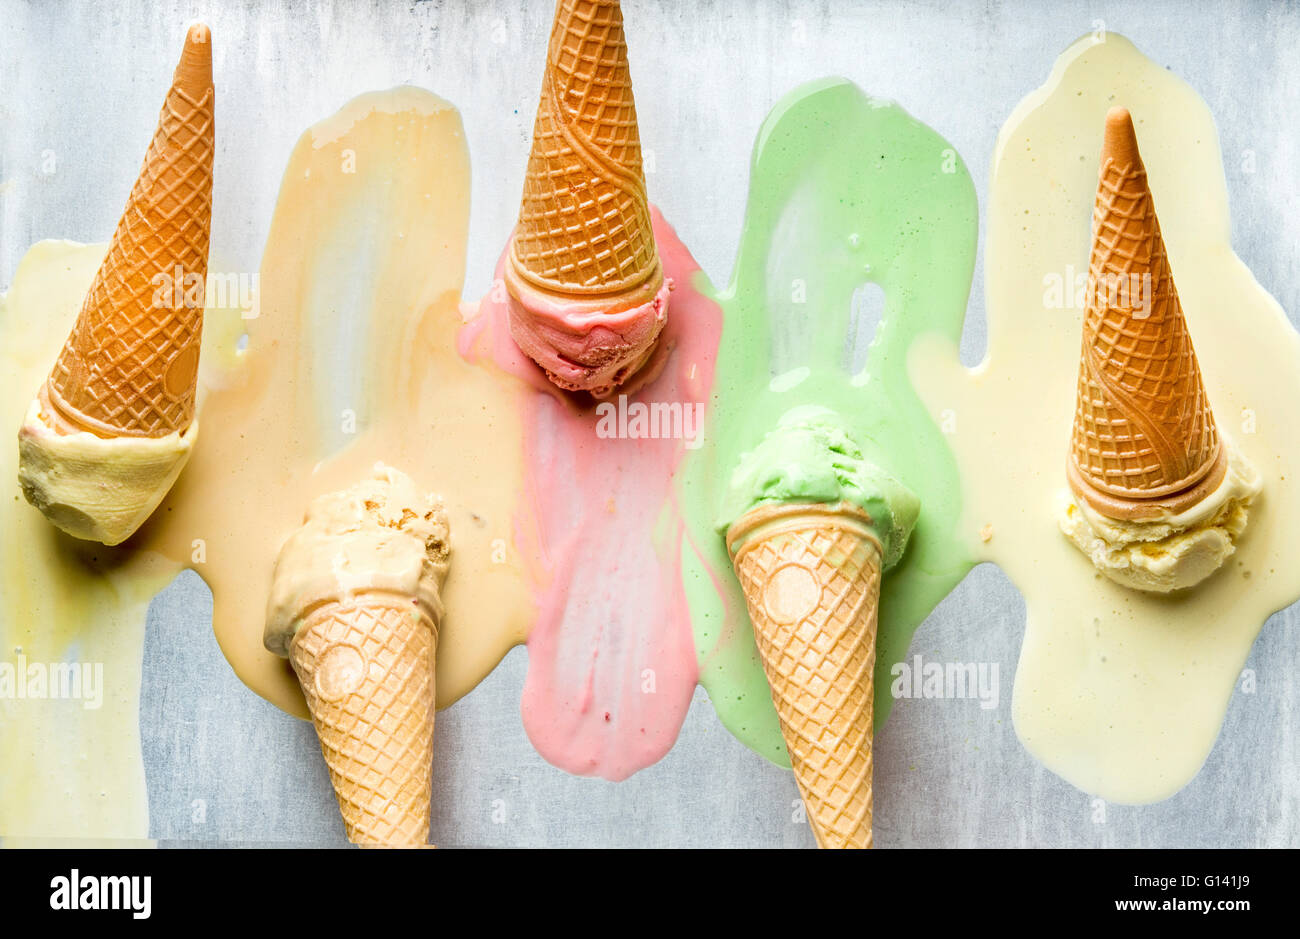 Colorful ice cream cones of different flavors. Melting scoops. Top view, steel metal background Stock Photo